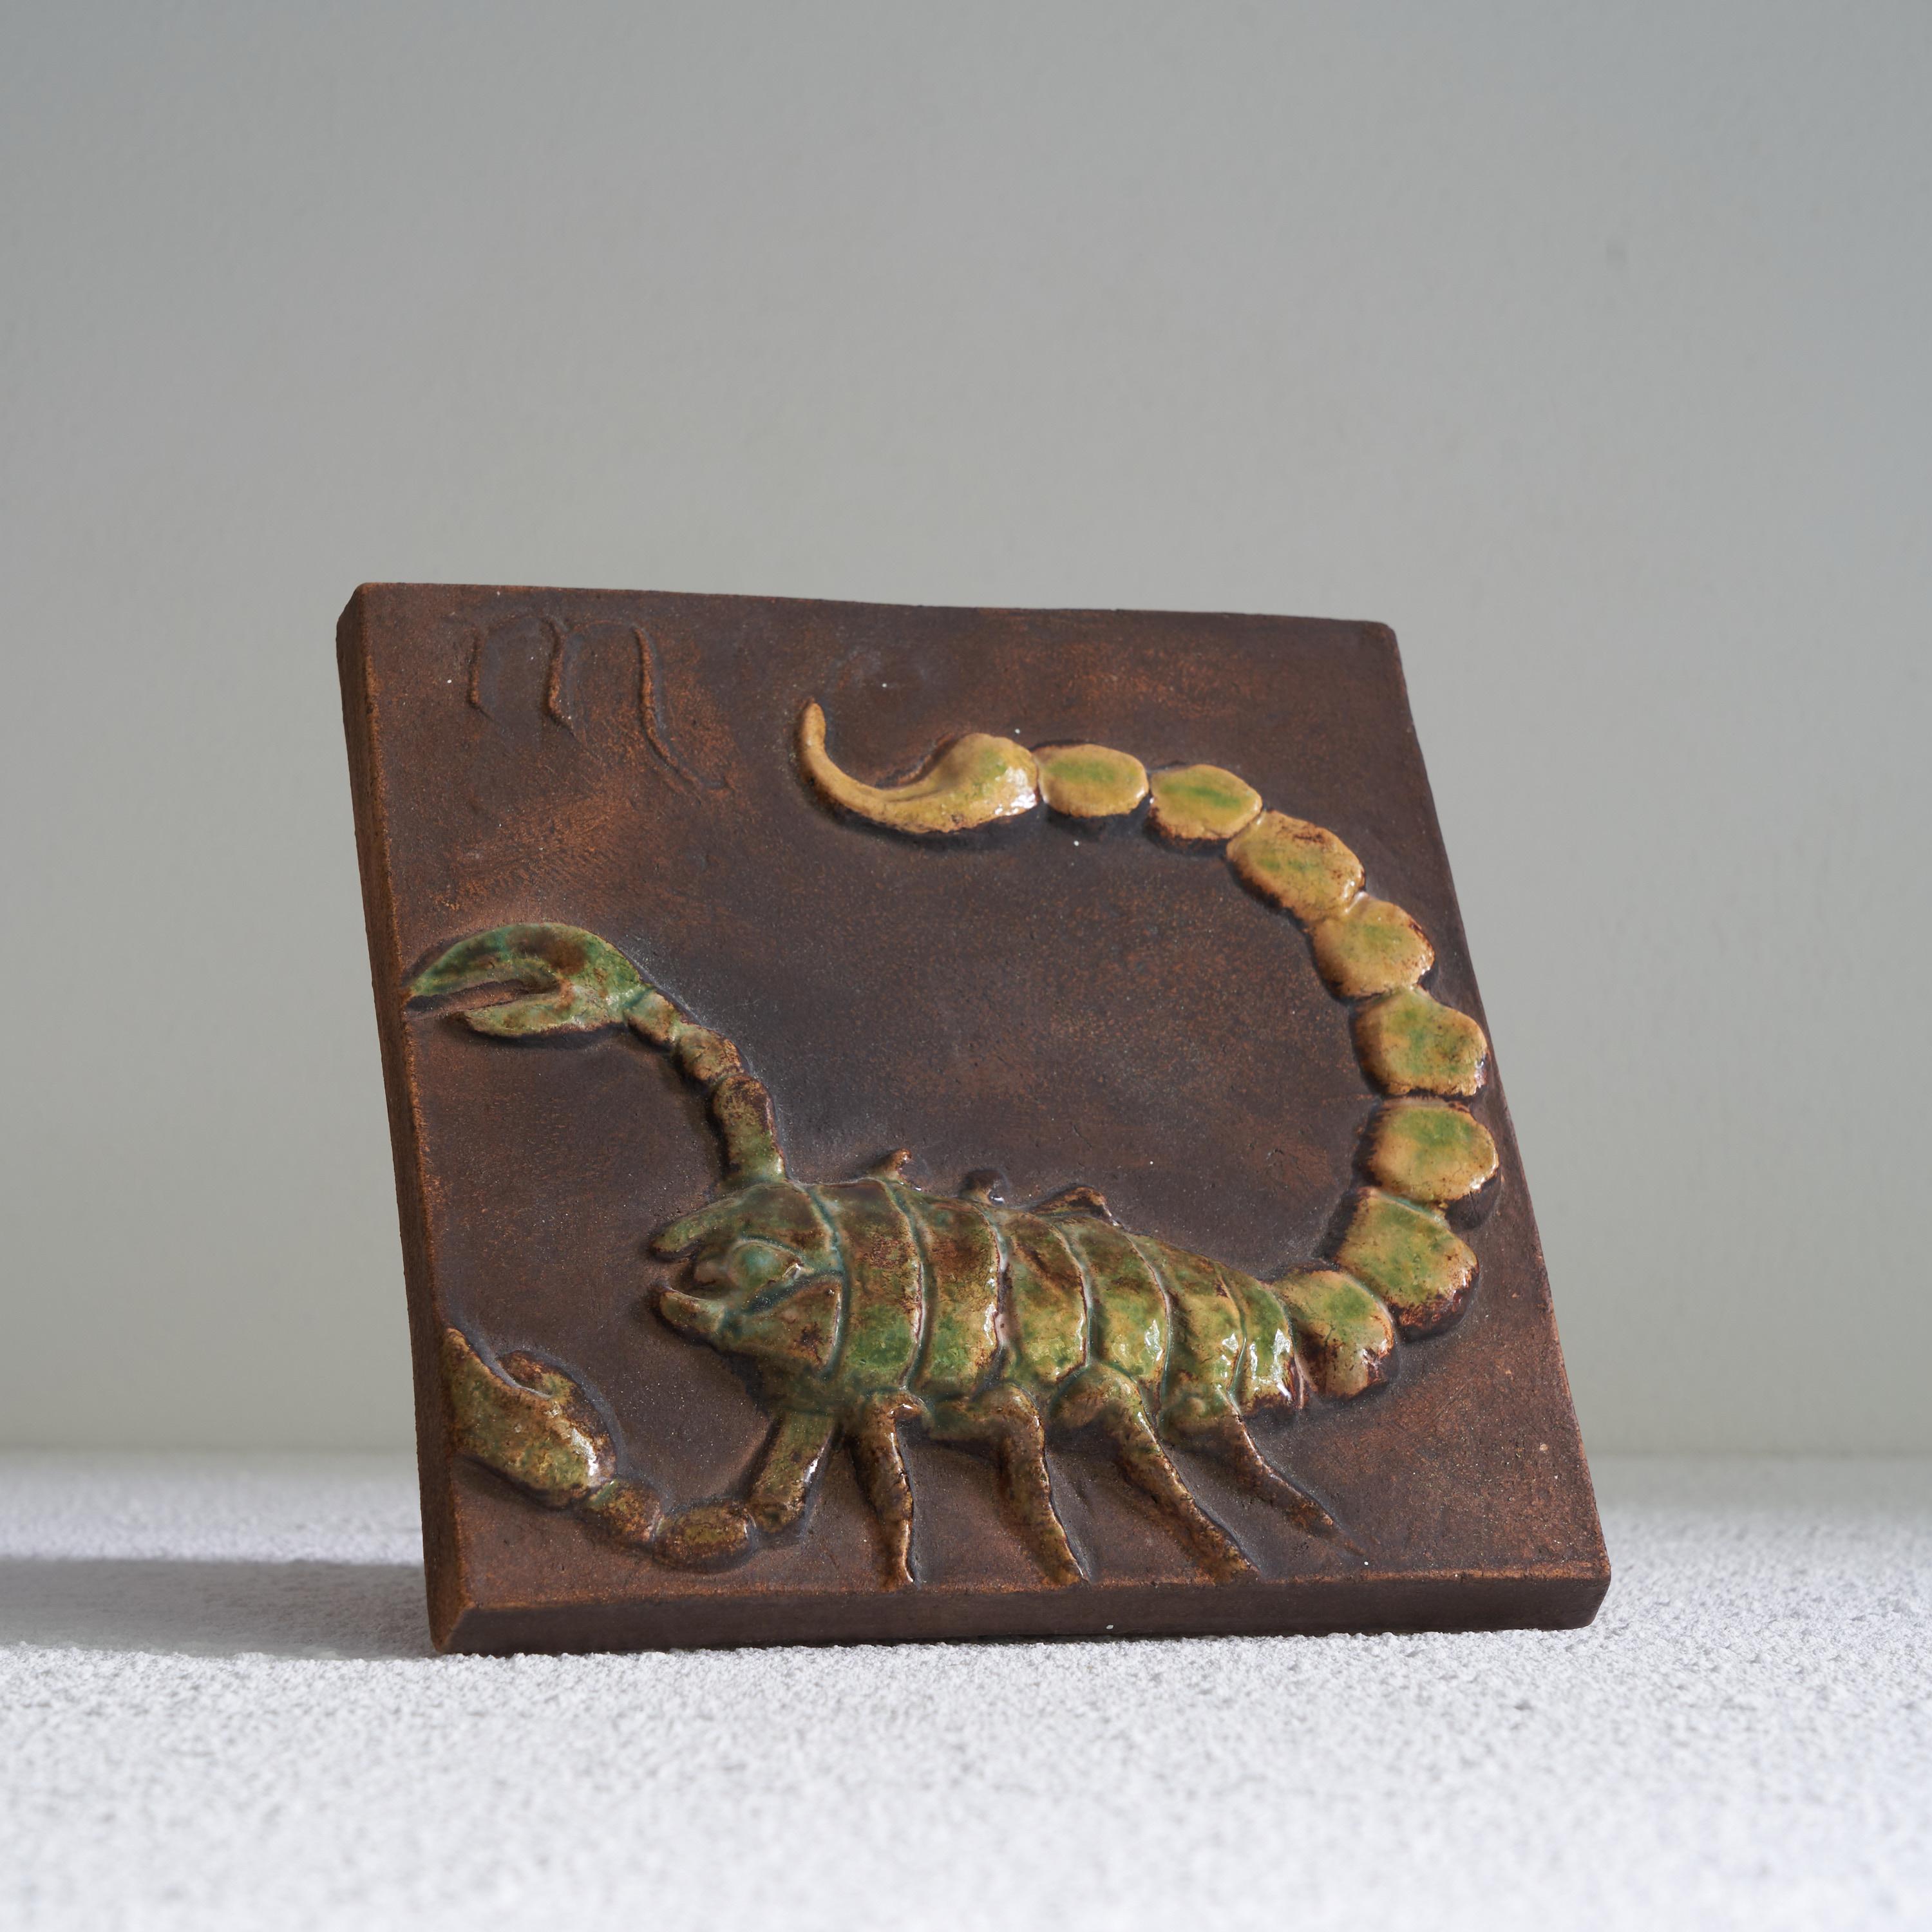 Vladimír David for Jihokera Bechyne Zodiac Tile Scorpio / Scorpion. Czech Republic, mid 20th century. 

This is a great mid-century studio pottery tile depicting the Zodiac sign of the Scorpion / Scorpio. It was made by the pottery workshop